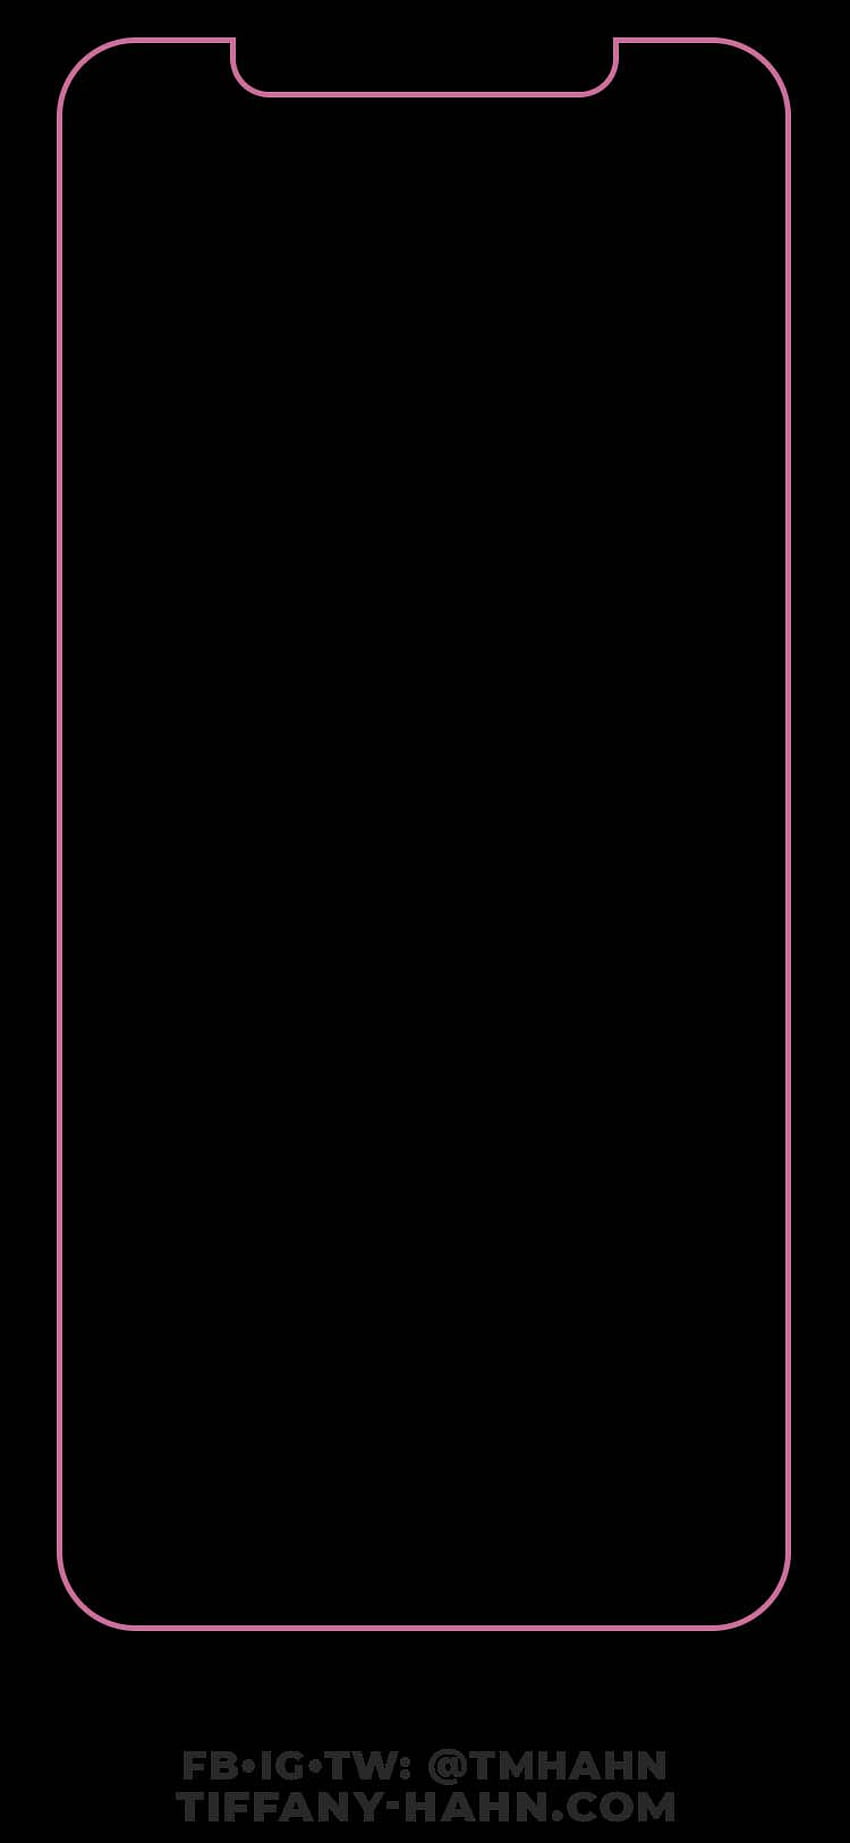 iPhone XS Max - Pink Black Outline - Home Screen. Black iphone, Pink iphone, Black HD phone wallpaper